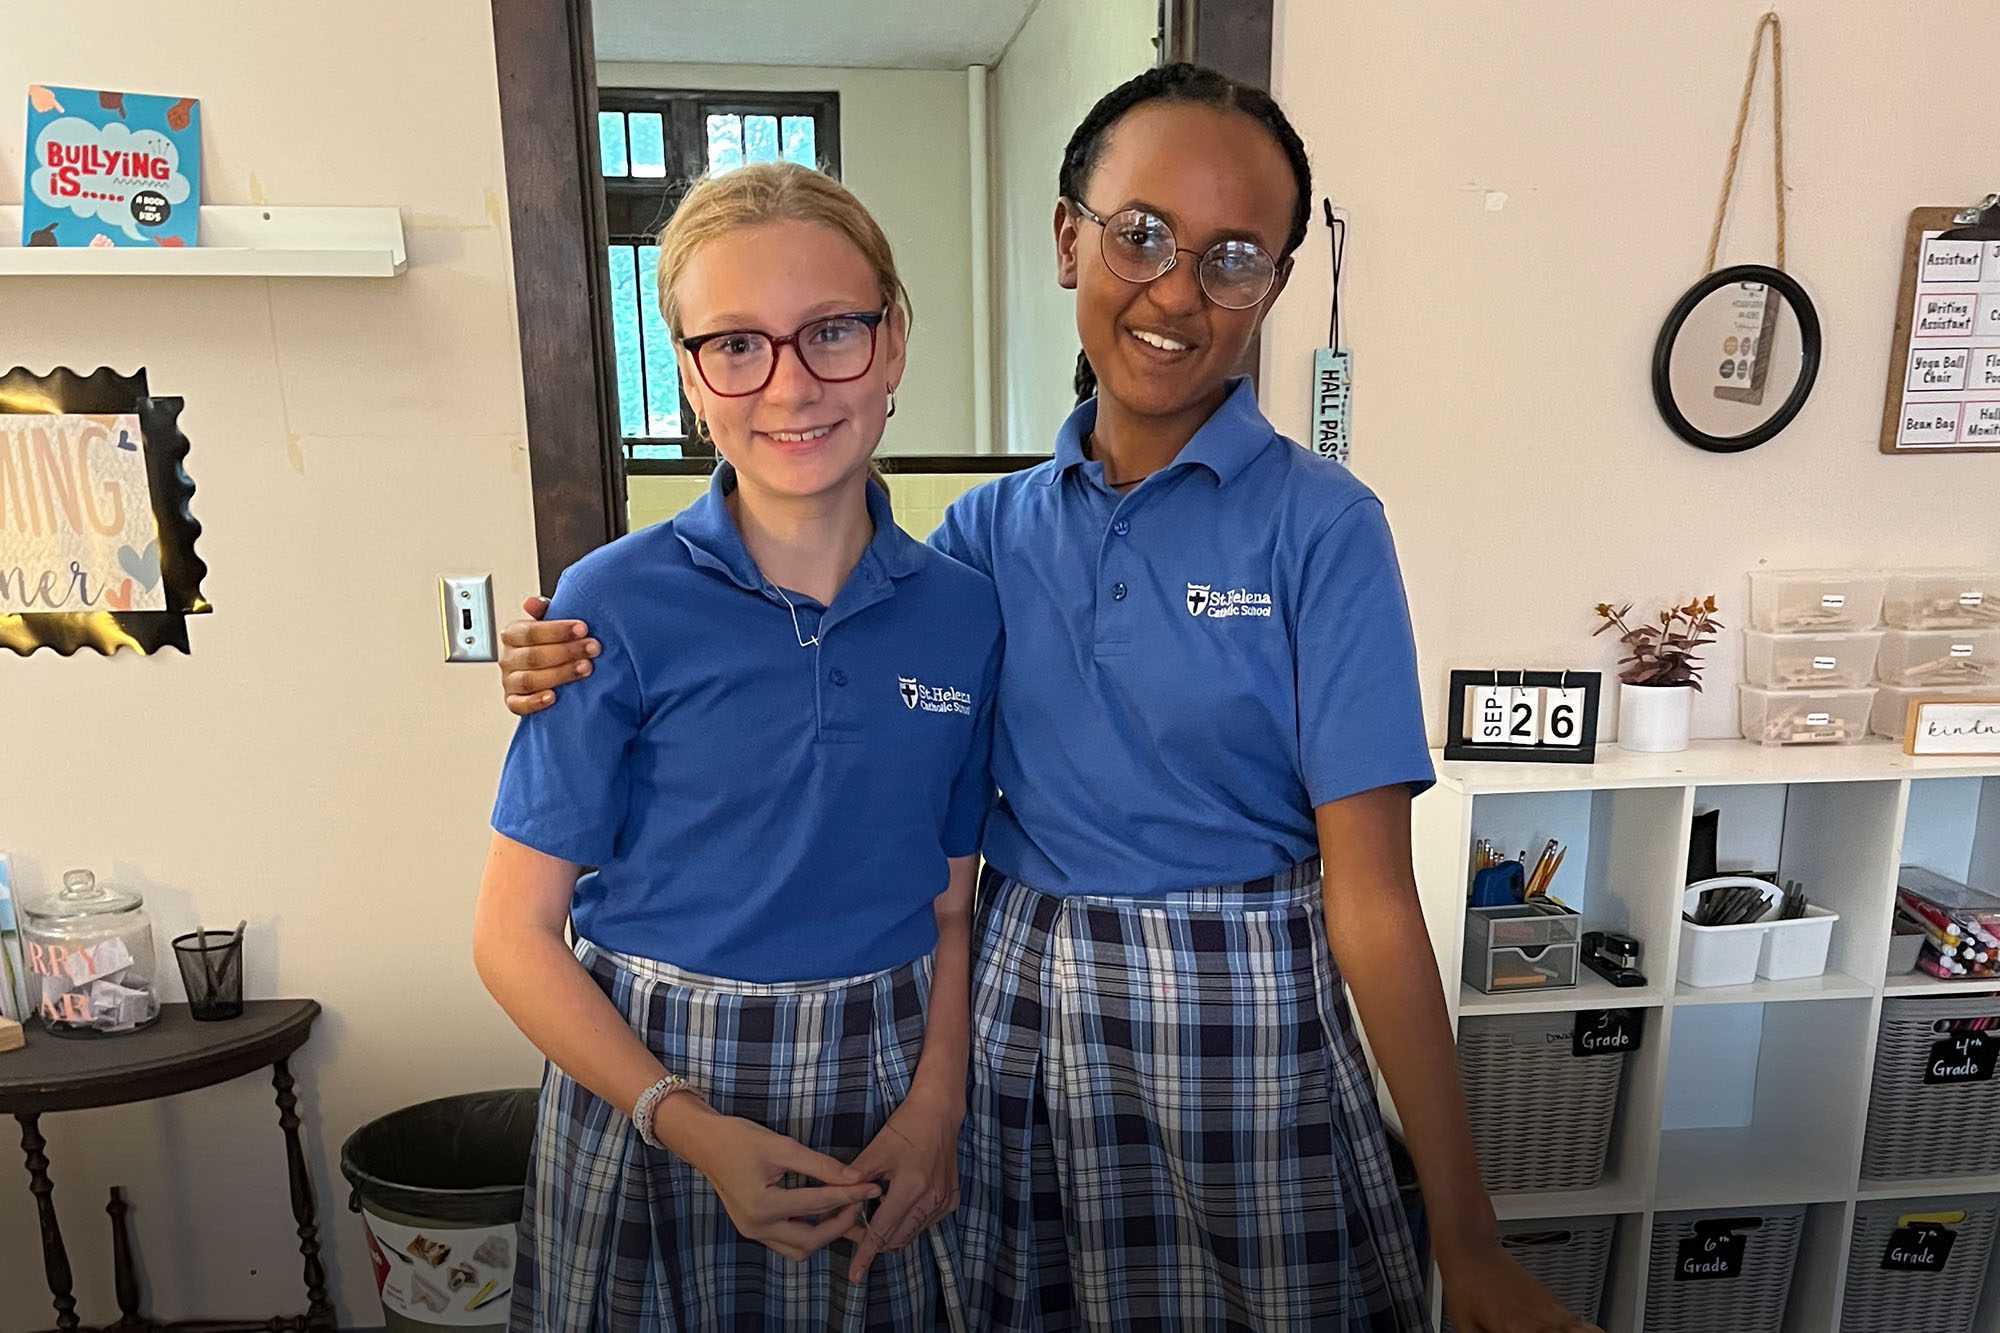 Two students one with their arm around the other smile joyously wearing new glasses they received.